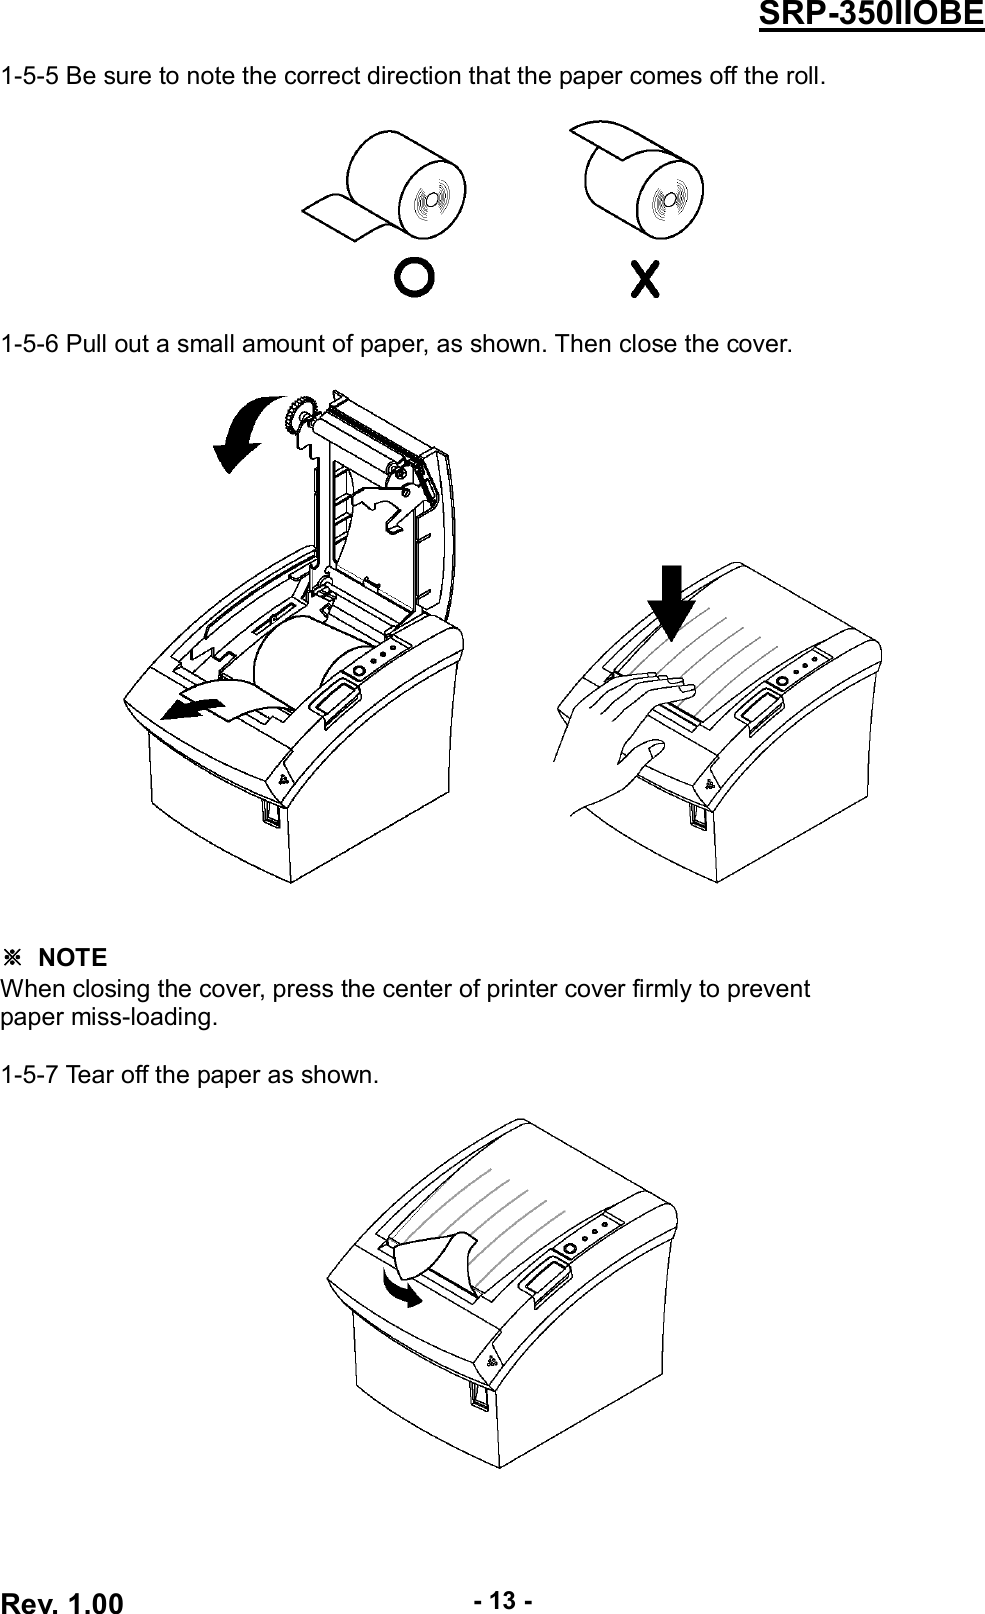  Rev. 1.00 - 13 - SRP-350IIOBE 1-5-5 Be sure to note the correct direction that the paper comes off the roll.    1-5-6 Pull out a small amount of paper, as shown. Then close the cover.             ※  NOTE When closing the cover, press the center of printer cover firmly to prevent paper miss-loading.  1-5-7 Tear off the paper as shown.   